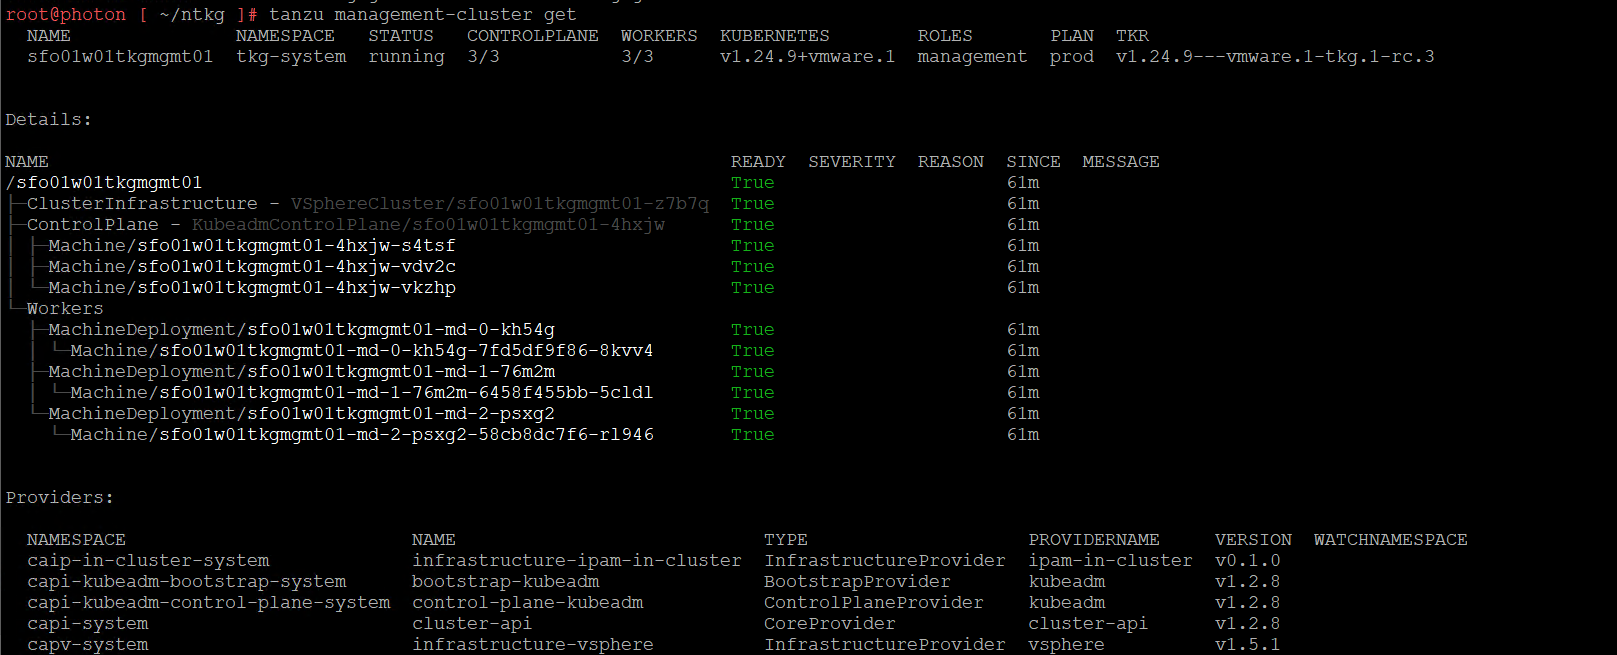 Management cluster status CLI output